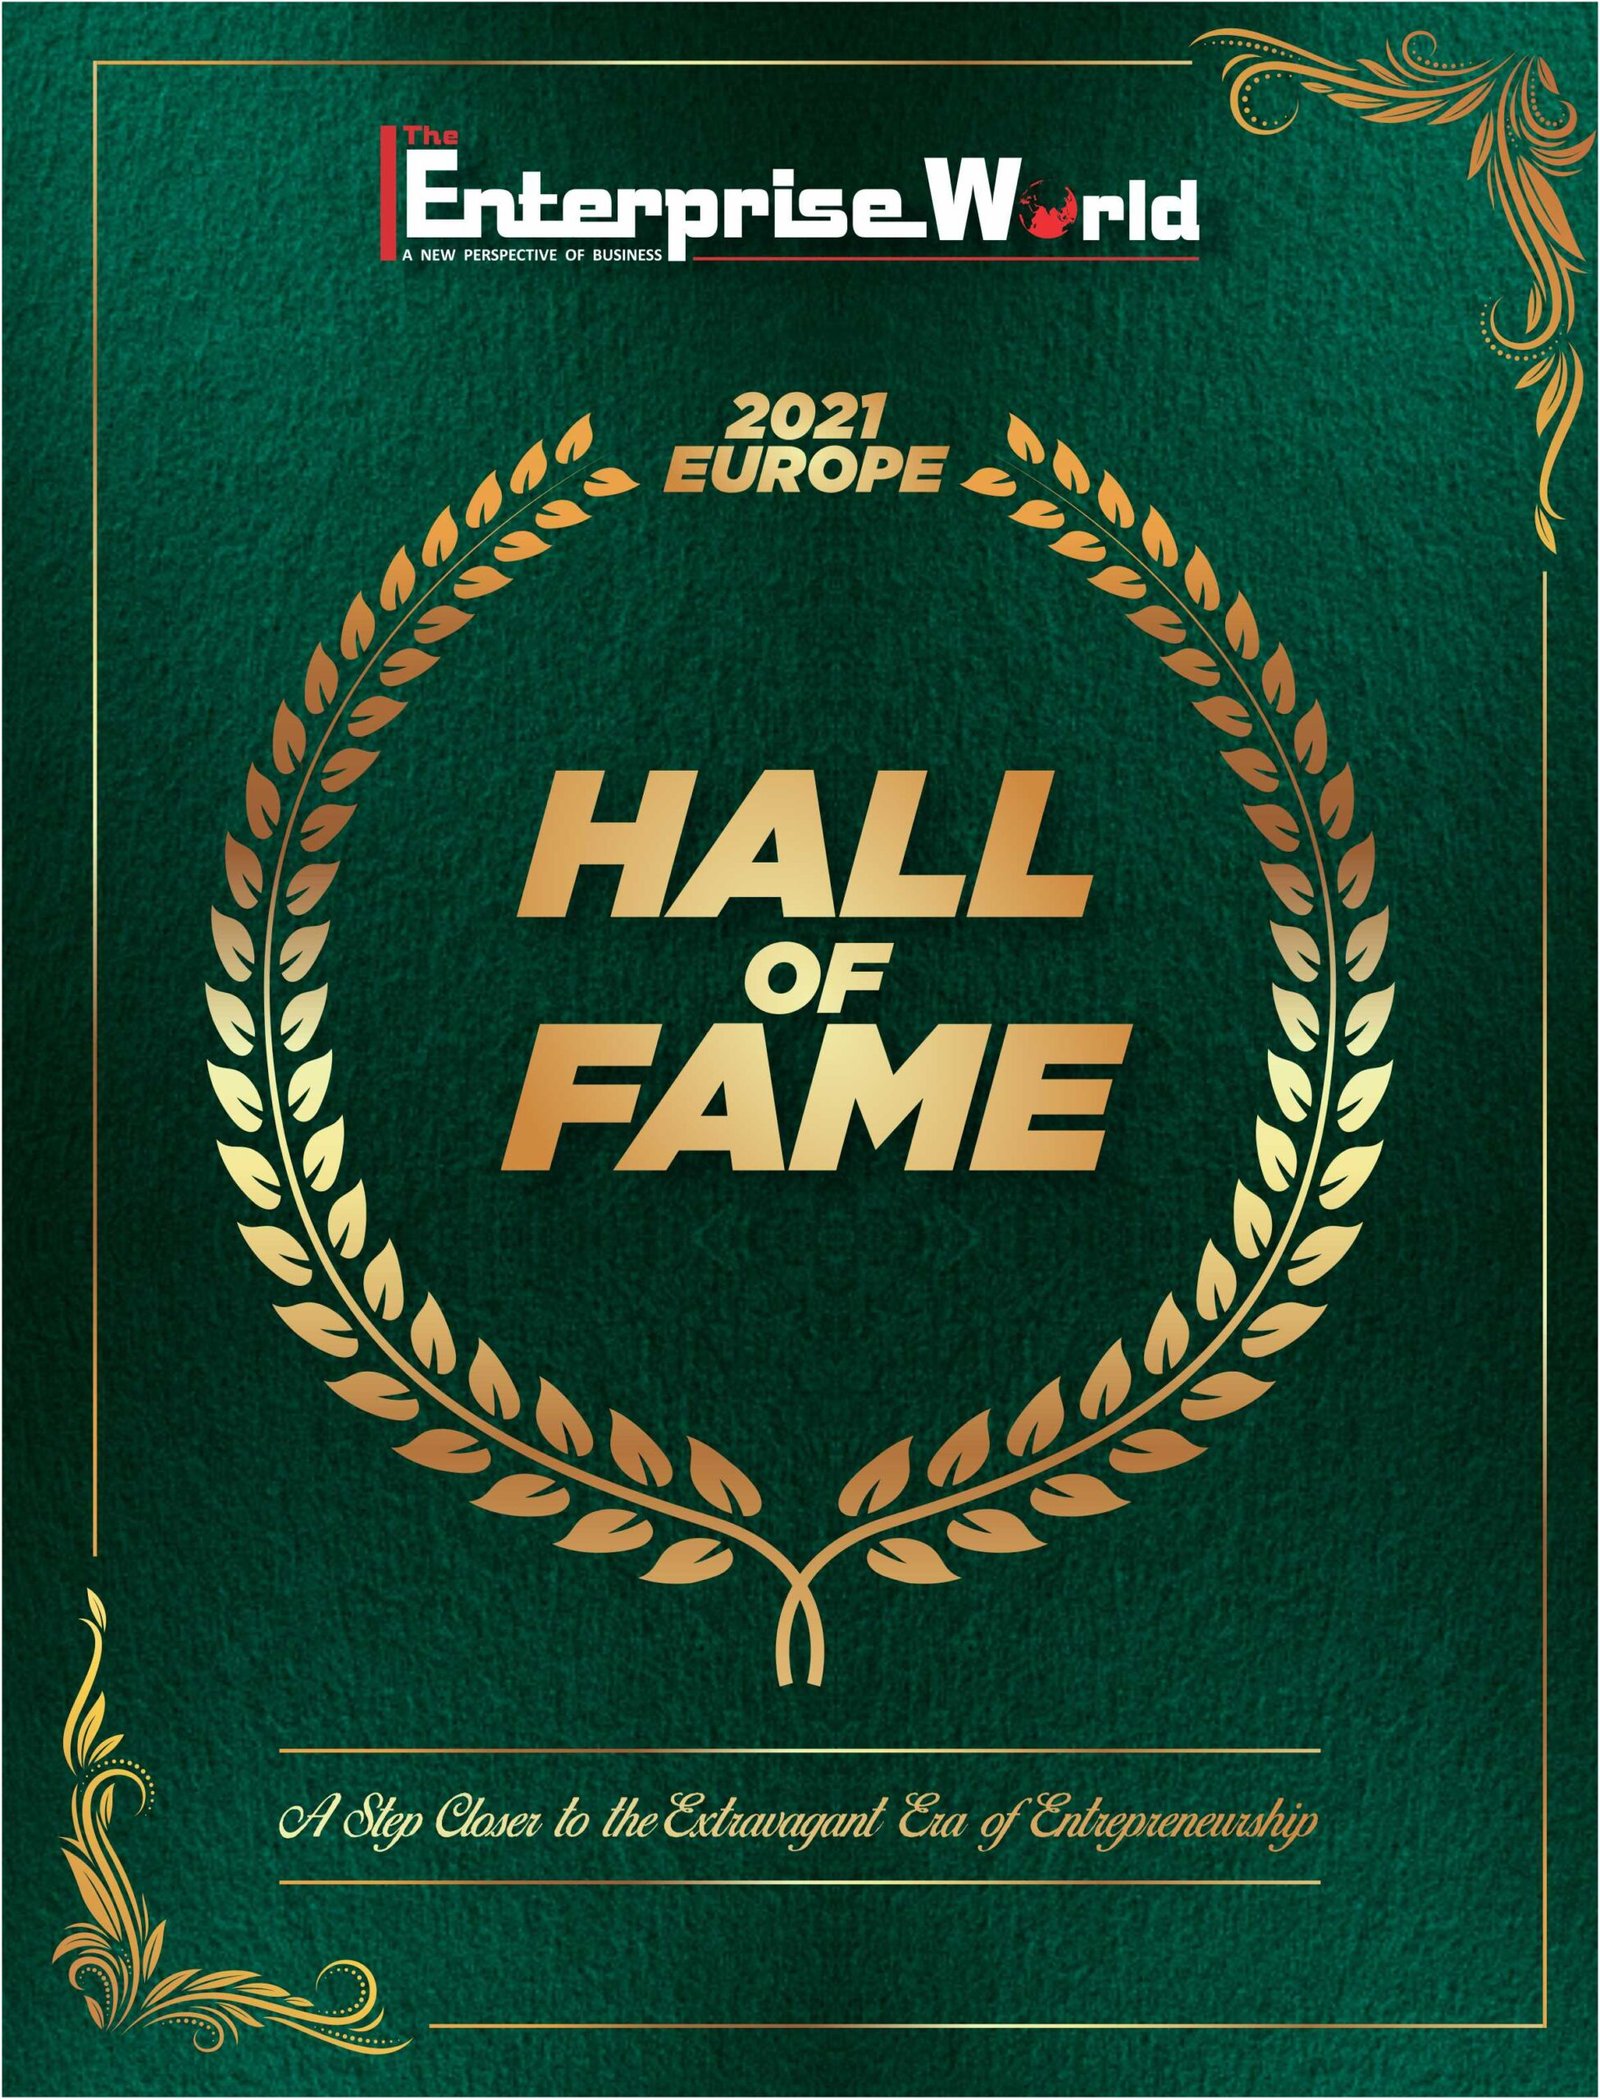 Hall of Fame - 2021 EUROPE Edition